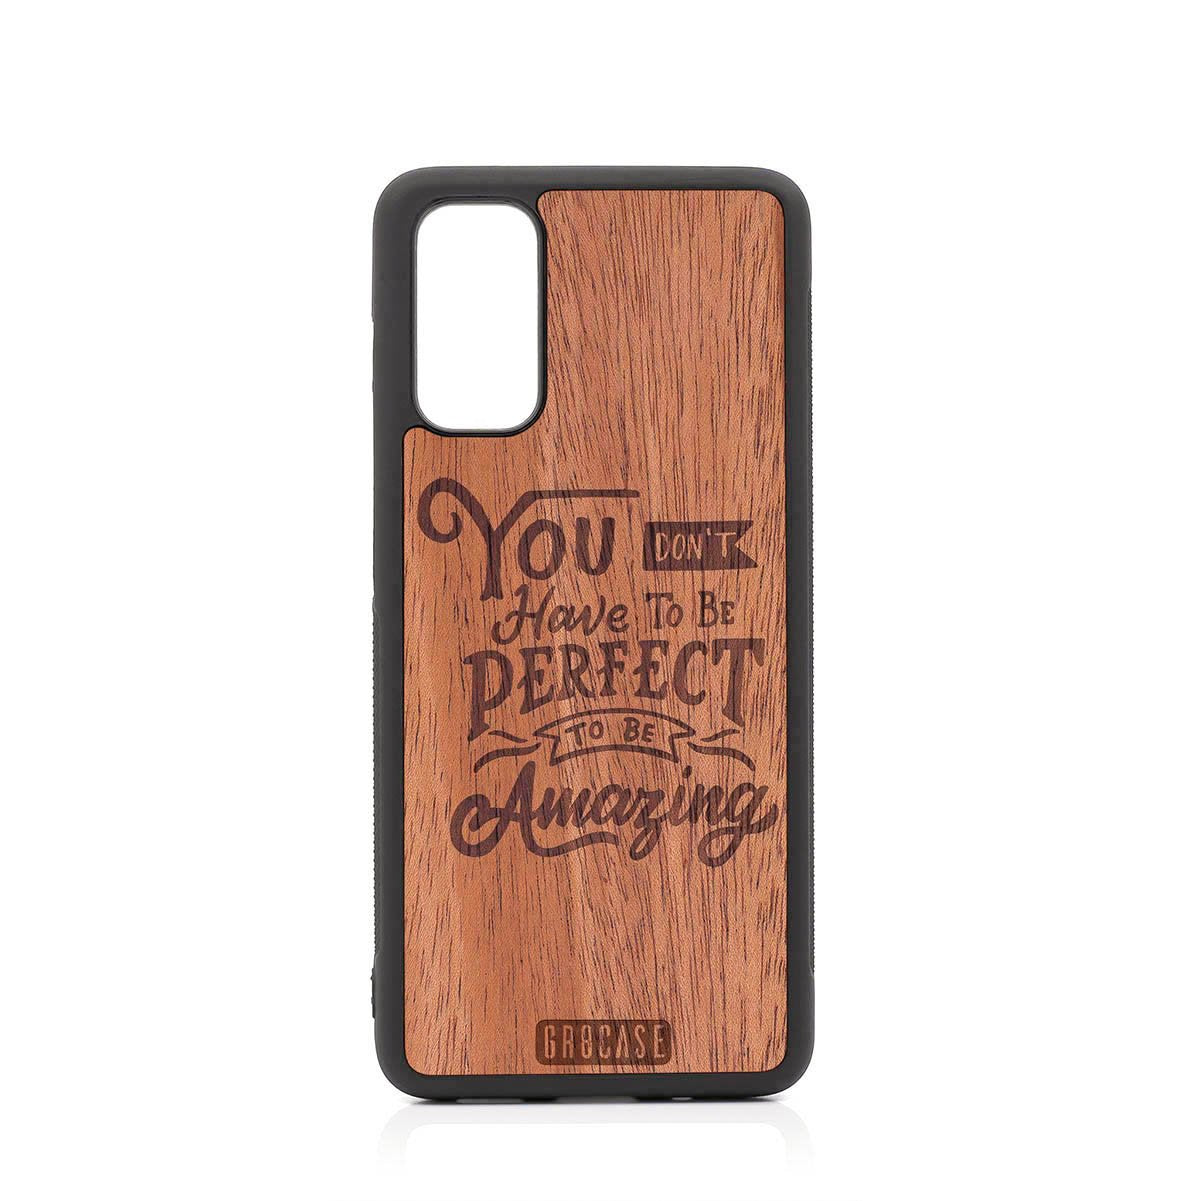 You Don't Have To Be Perfect To Be Amazing Design Wood Case For Samsung Galaxy S20 FE 5G